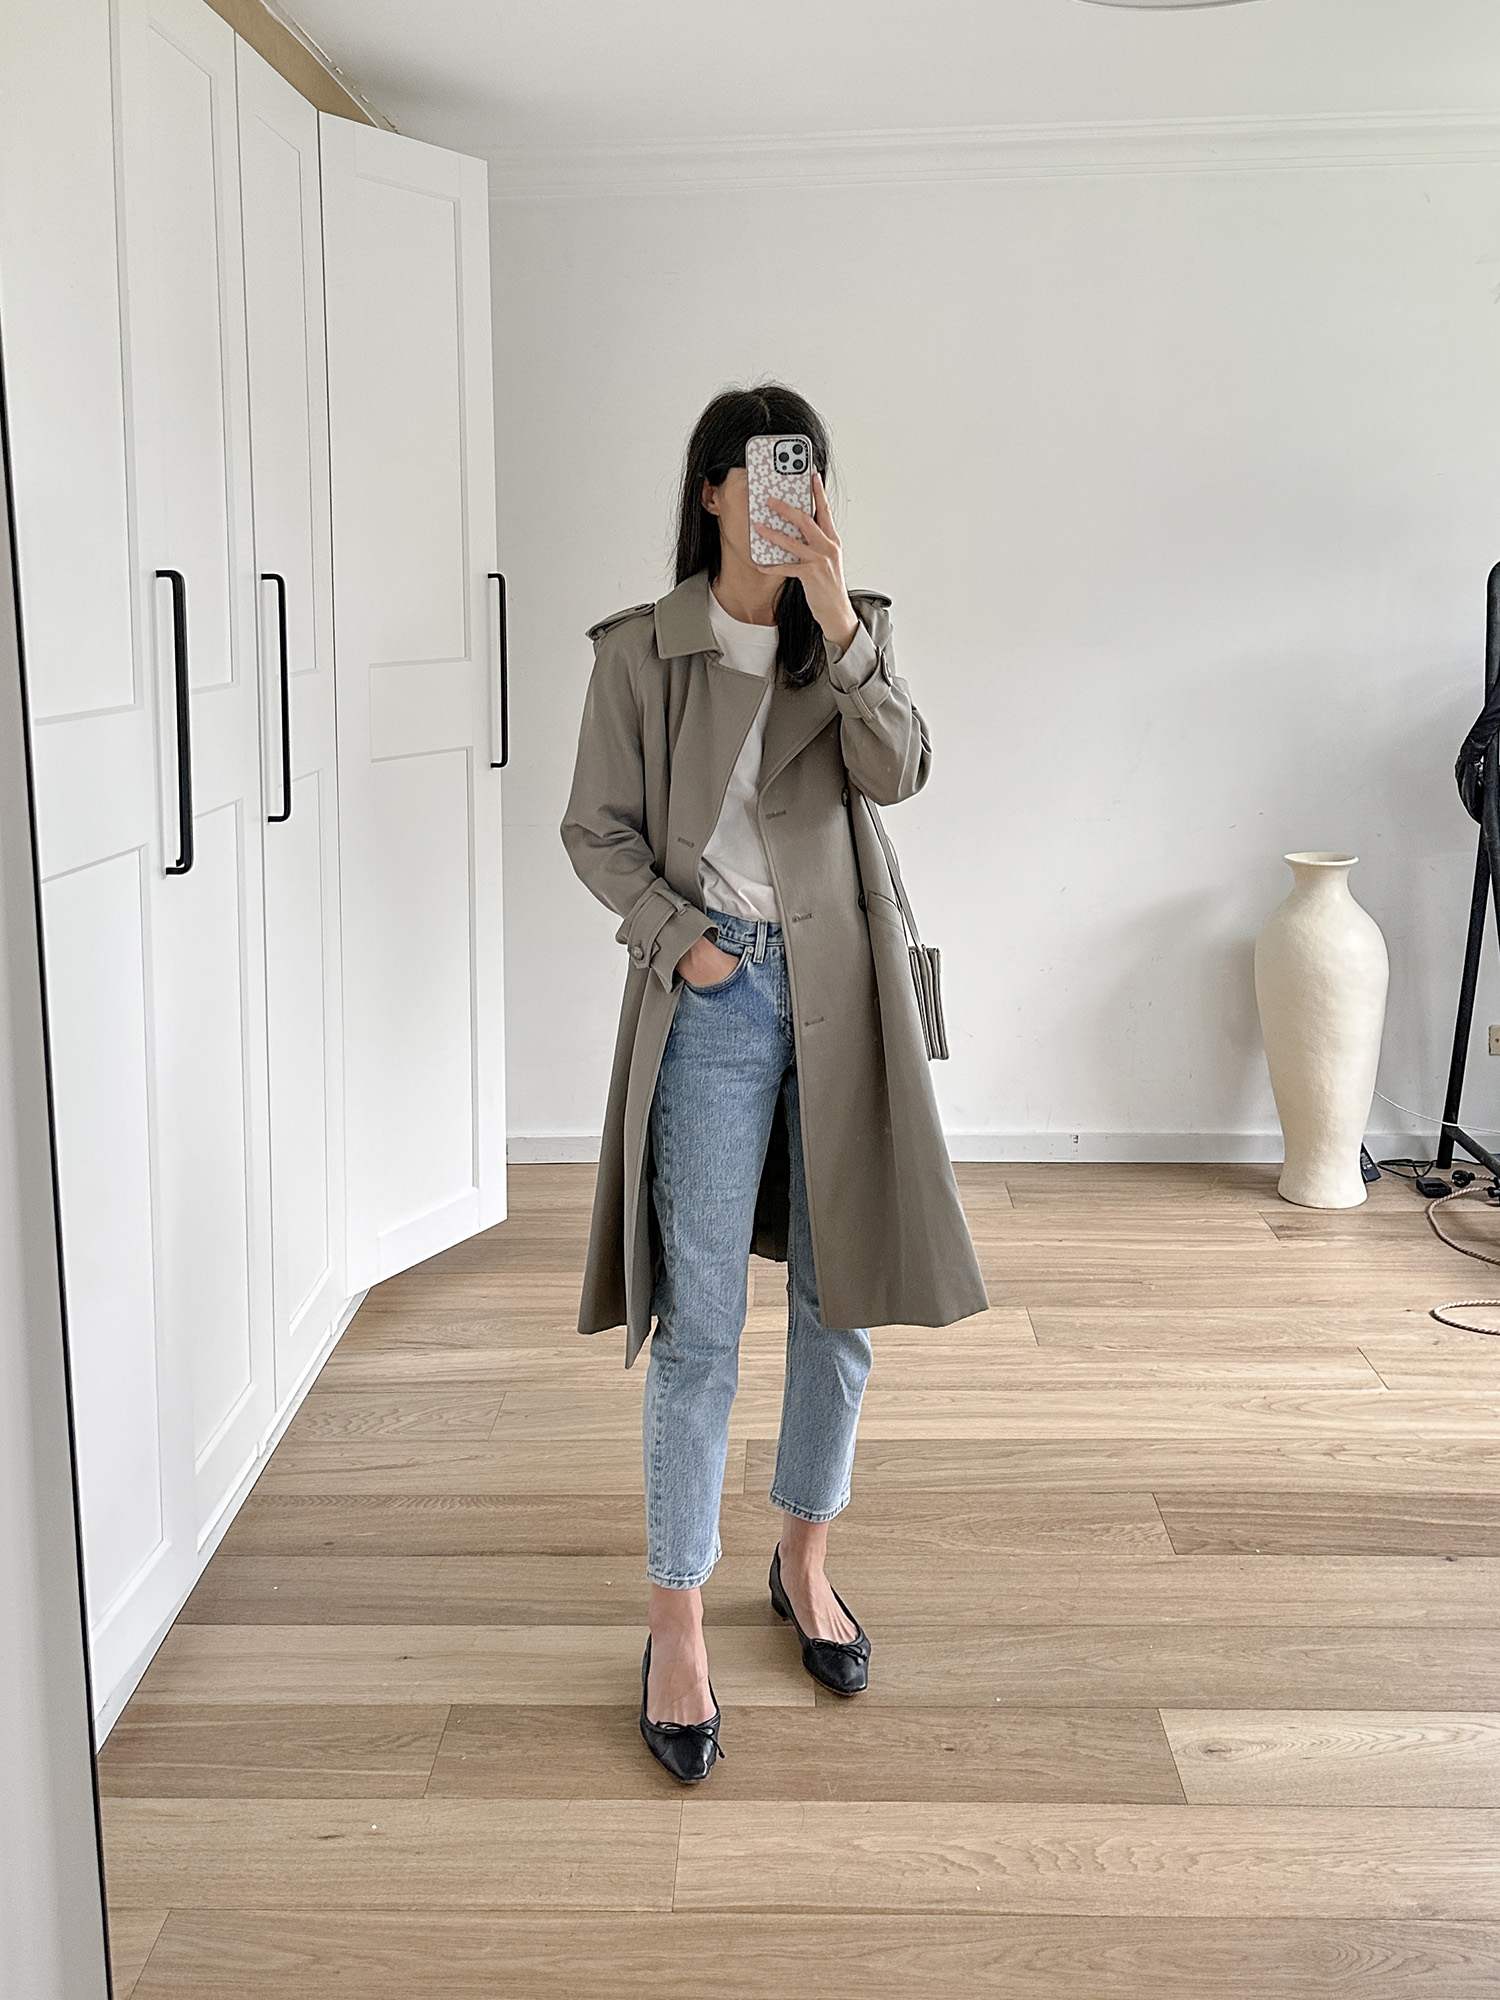 Wearing Arket jeans with Sezane Scott Trench Coat and old Celine trio